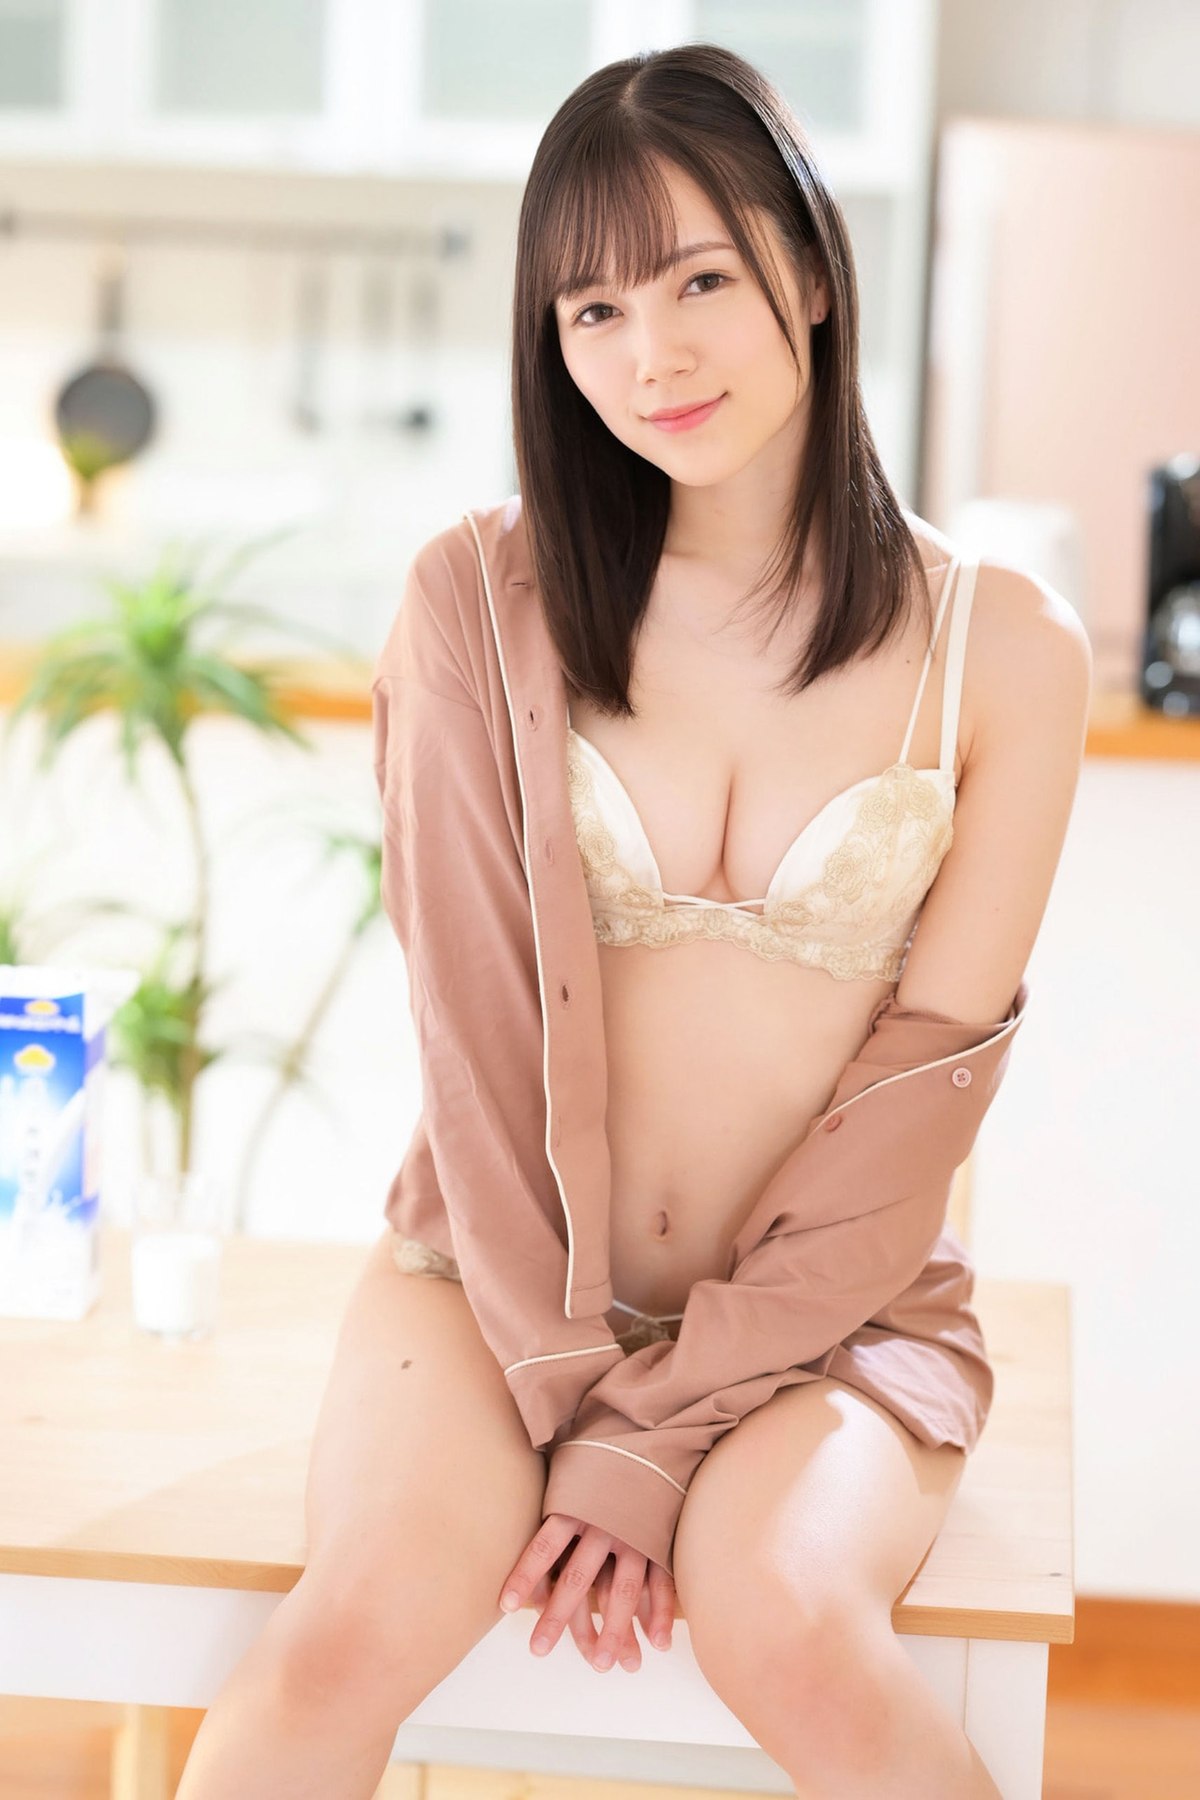 Photobook Remu Suzumori 涼森れむ Ejaculates And Lives Together A 0007 3630276942.jpg